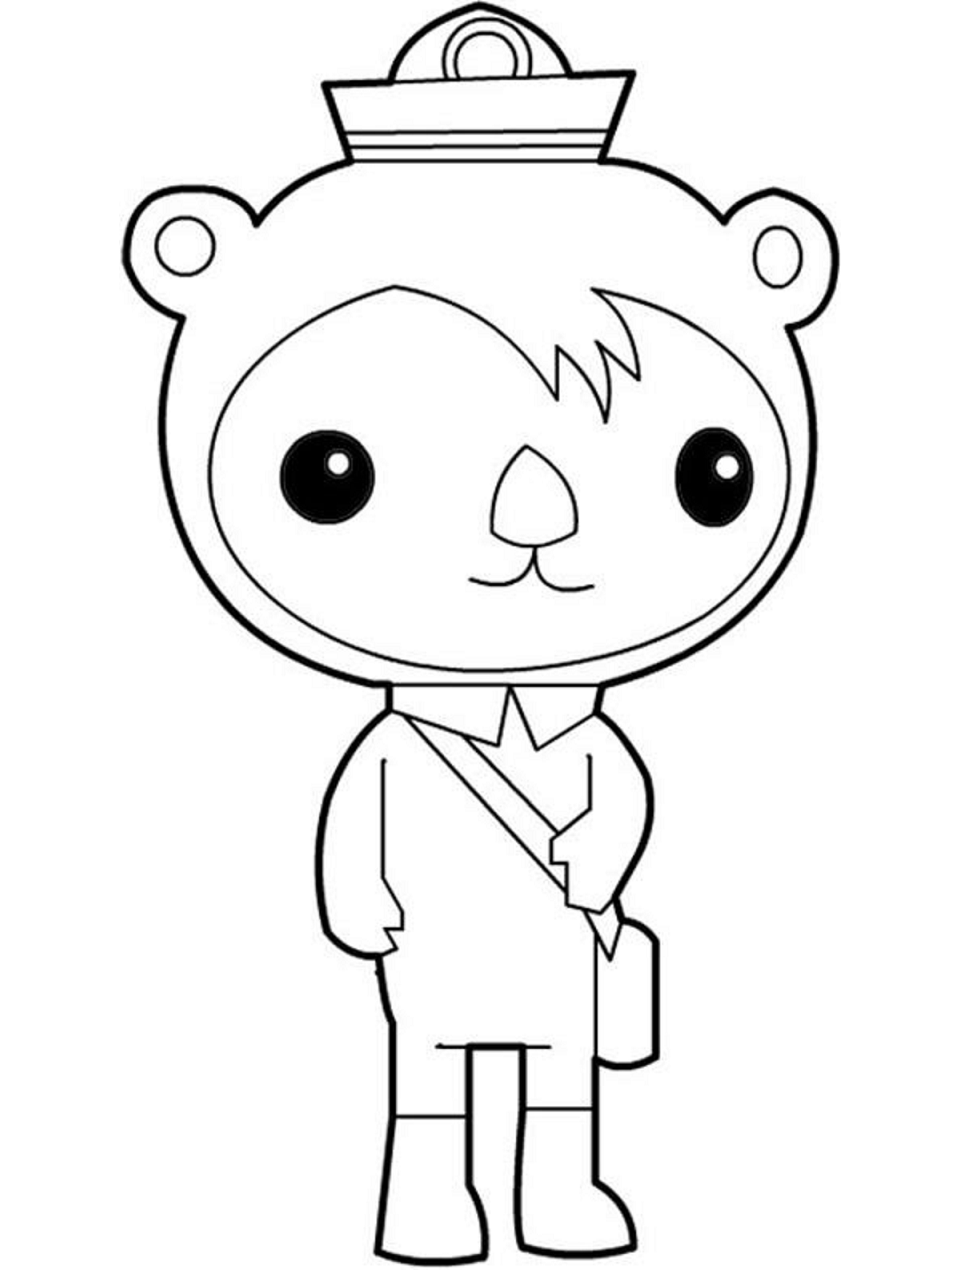 Shellington In Octonauts Coloring Page - Free Printable ...